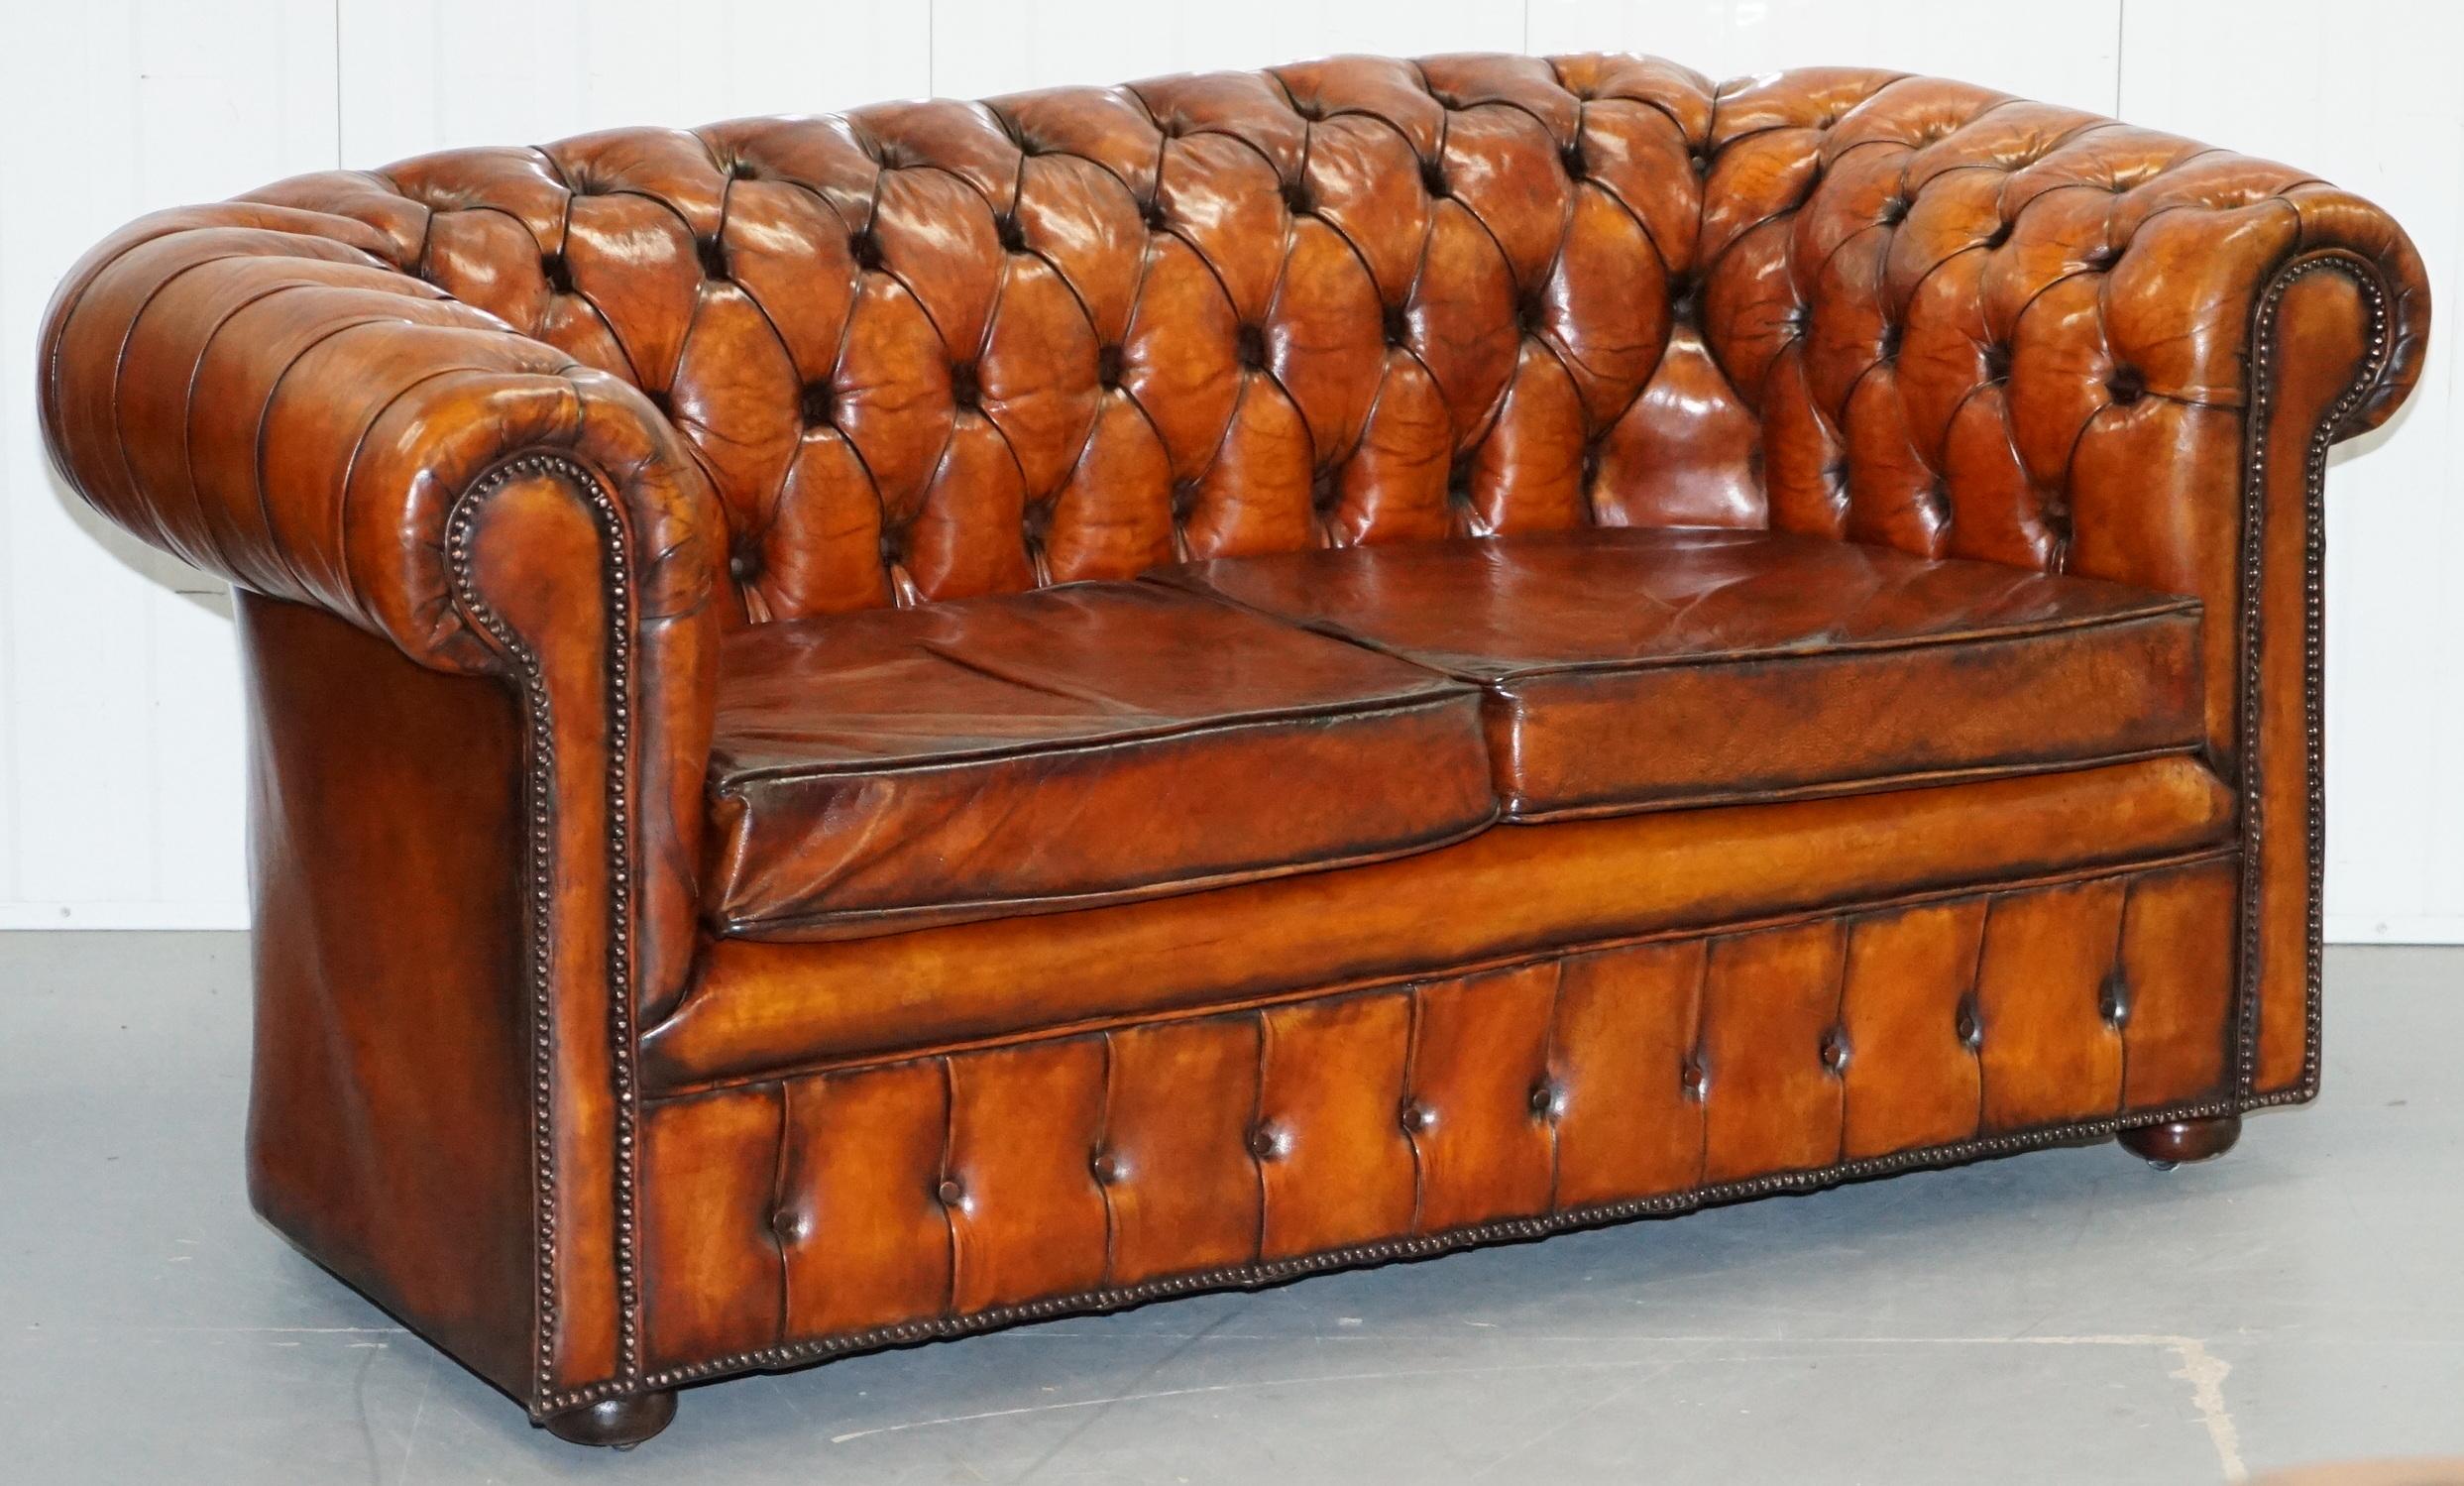 We are delighted to offer for sale this very rare absolutely stunning circa 1930s fully restored Chesterfield aged whiskey brown leather gentleman’s club sofa with very comfortable feather filled seat cushions

Where to begin… if you’re looking